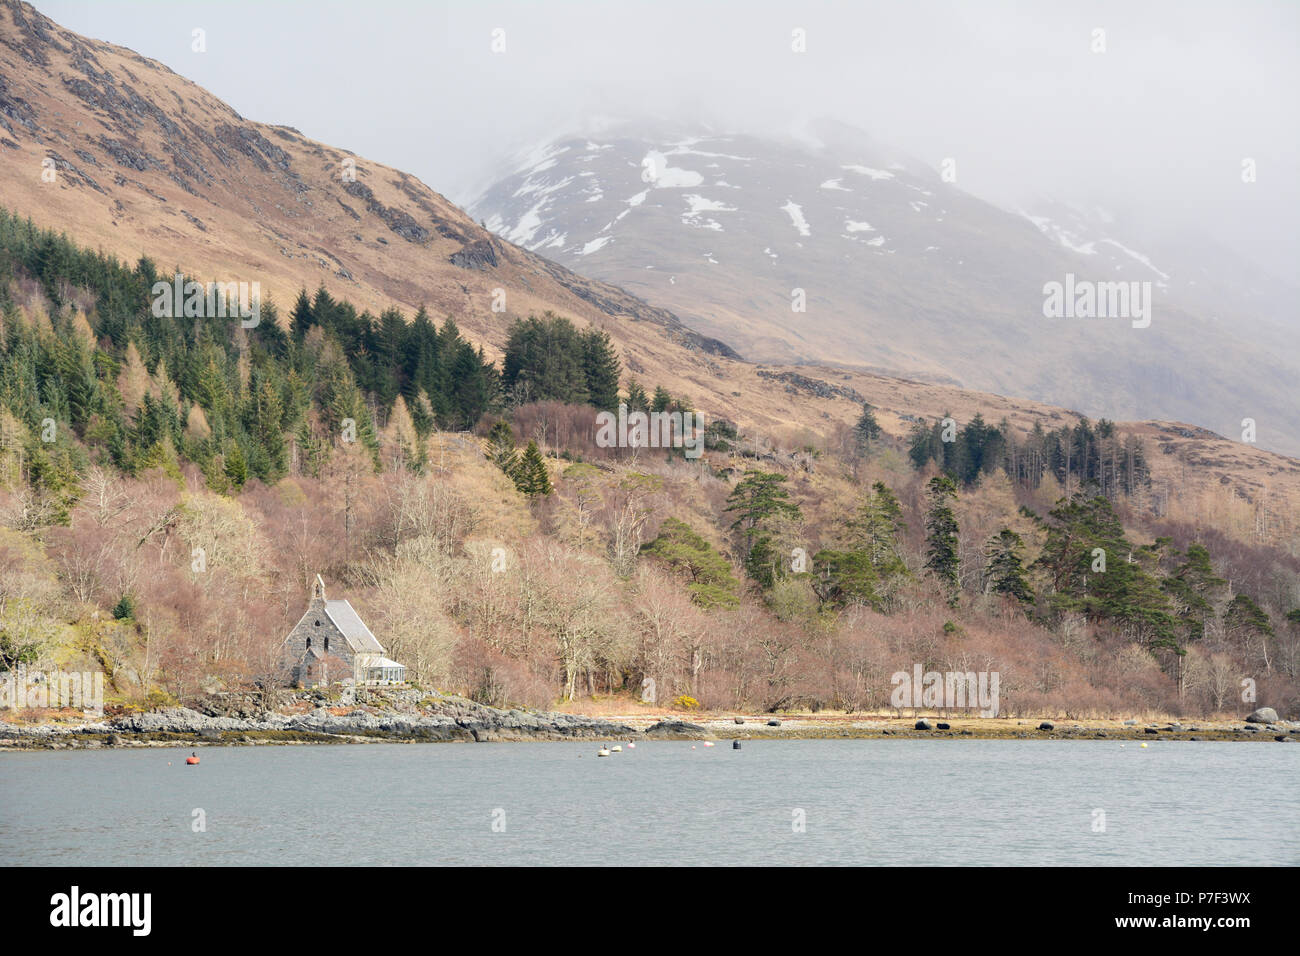 An old church by the sea with Luinne Bheinn munro in the background, Inverie, Knoydart Peninsula, Scottish Highlands, Scotland, United Kingdom. Stock Photo